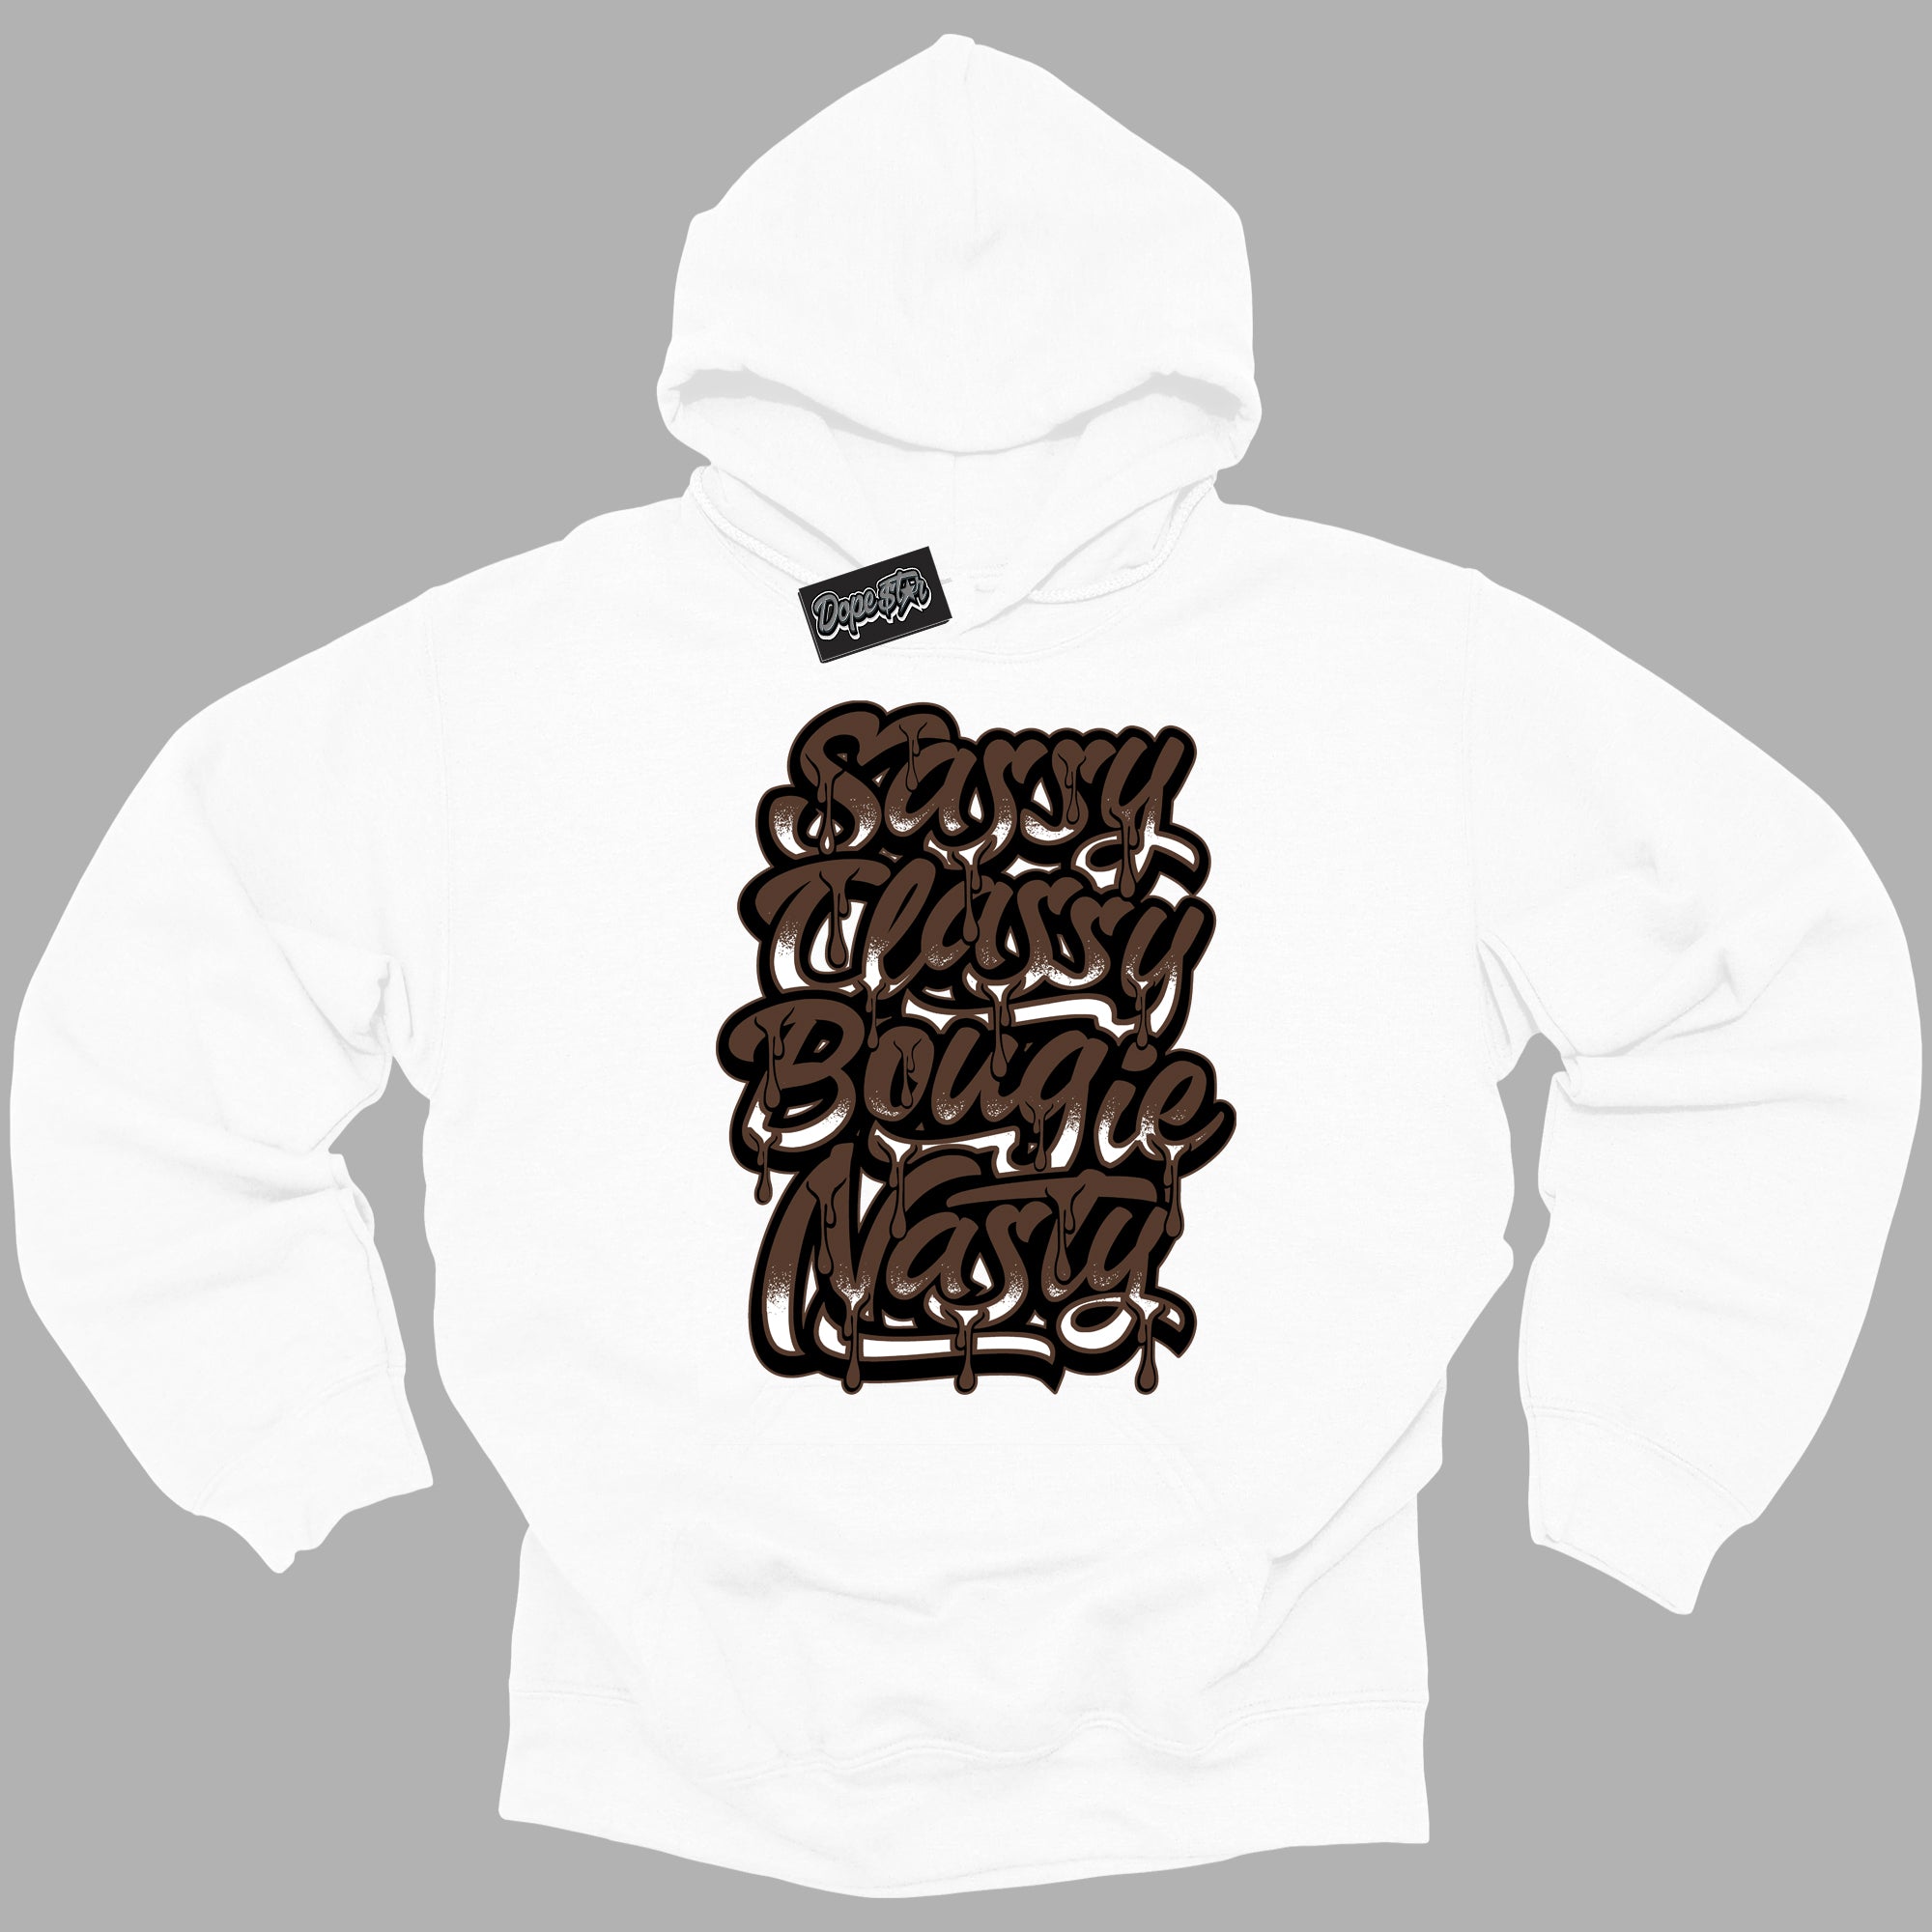 Cool White Graphic DopeStar Hoodie with “ Sassy Classy “ print, that perfectly matches Palomino 1s sneakers